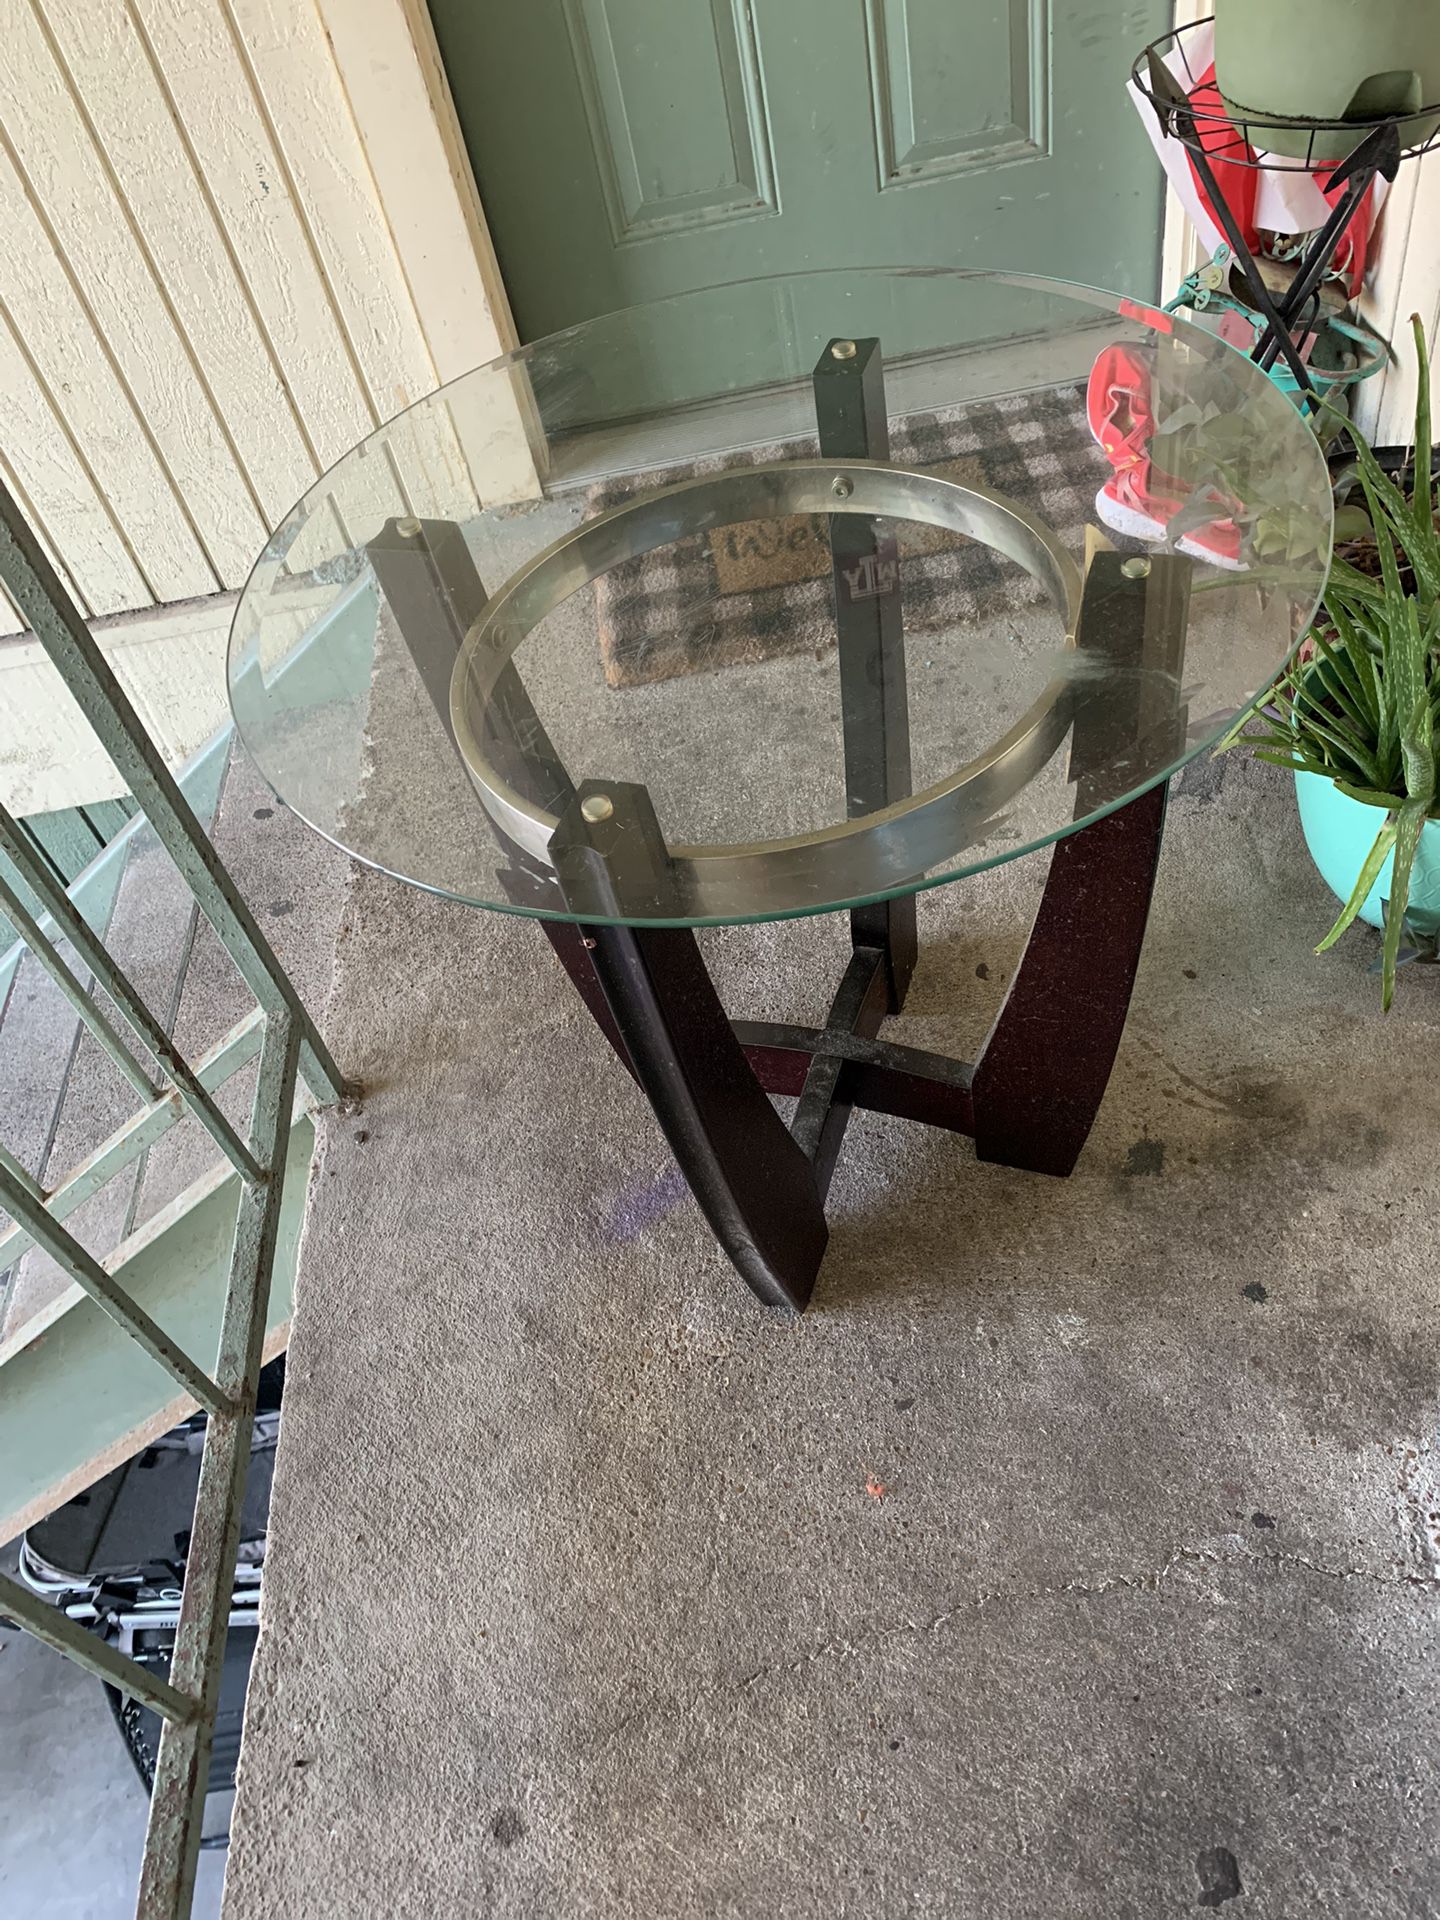 Two End Tables 